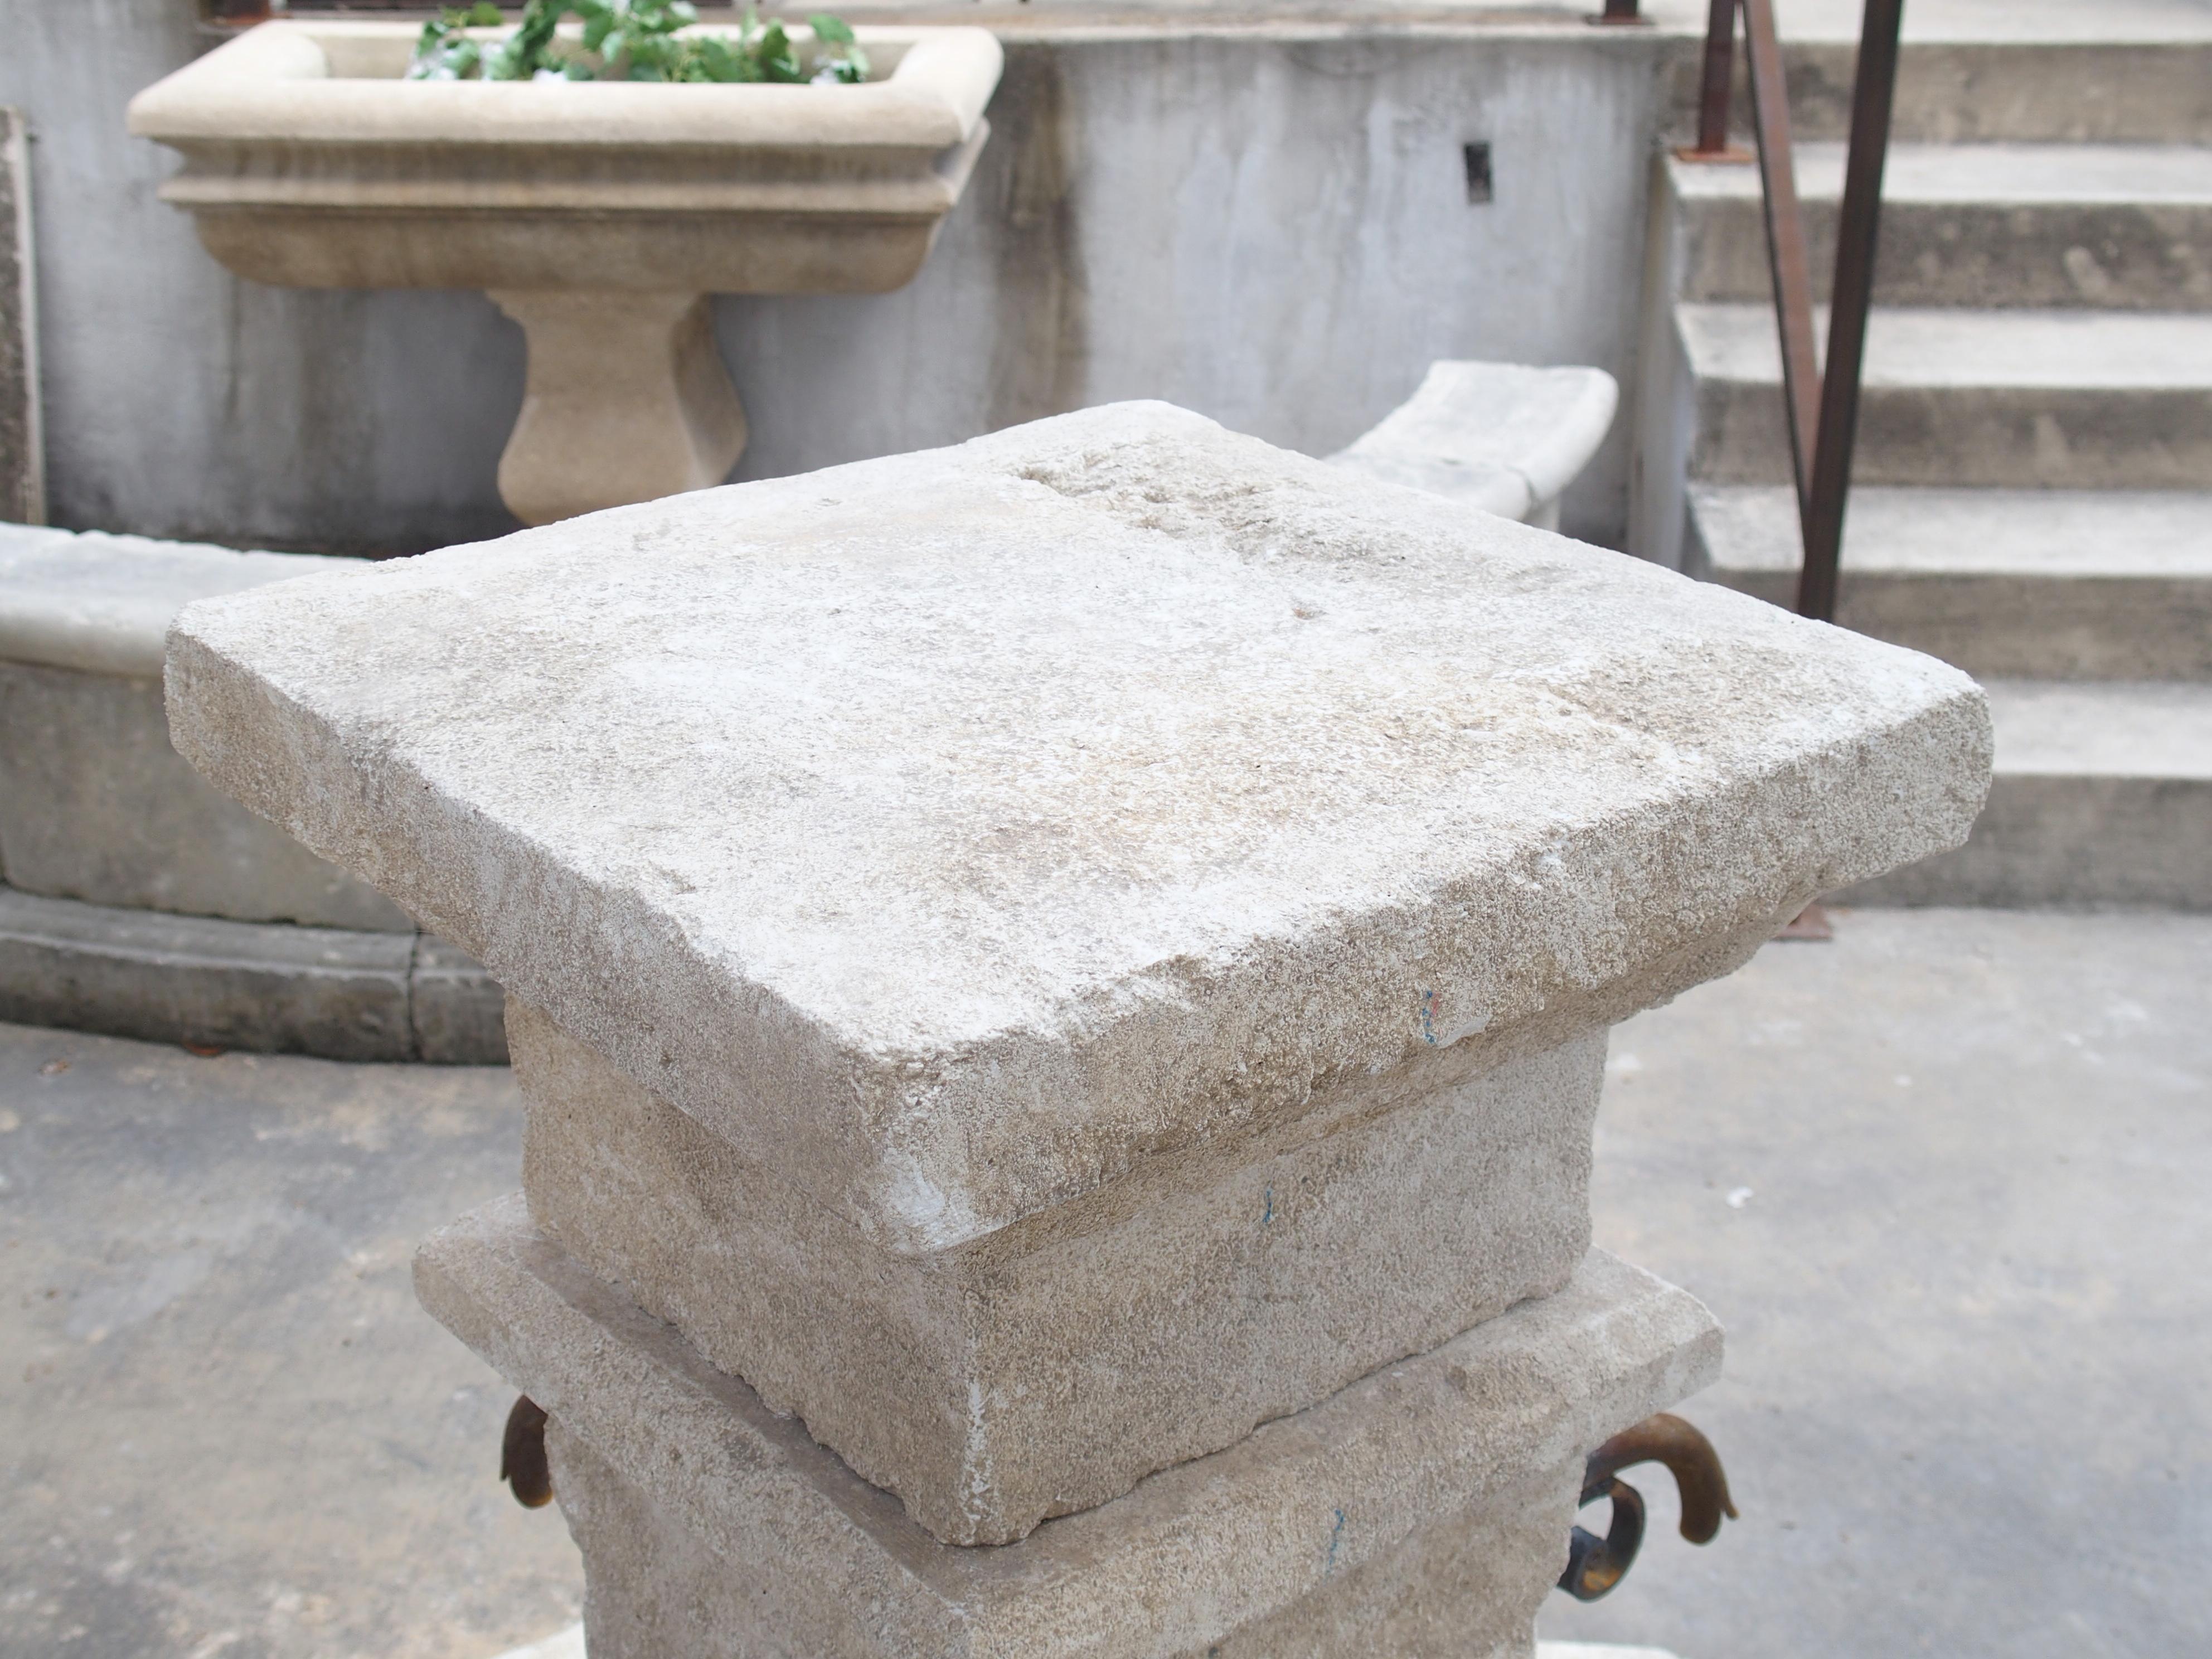 This hand-carved limestone village fountain from Provence, France features an octagonal basin with canted top edges. The pillar is comprised of six stones of various sizes, but all are square or rectangular in shape.

A flat square finial with